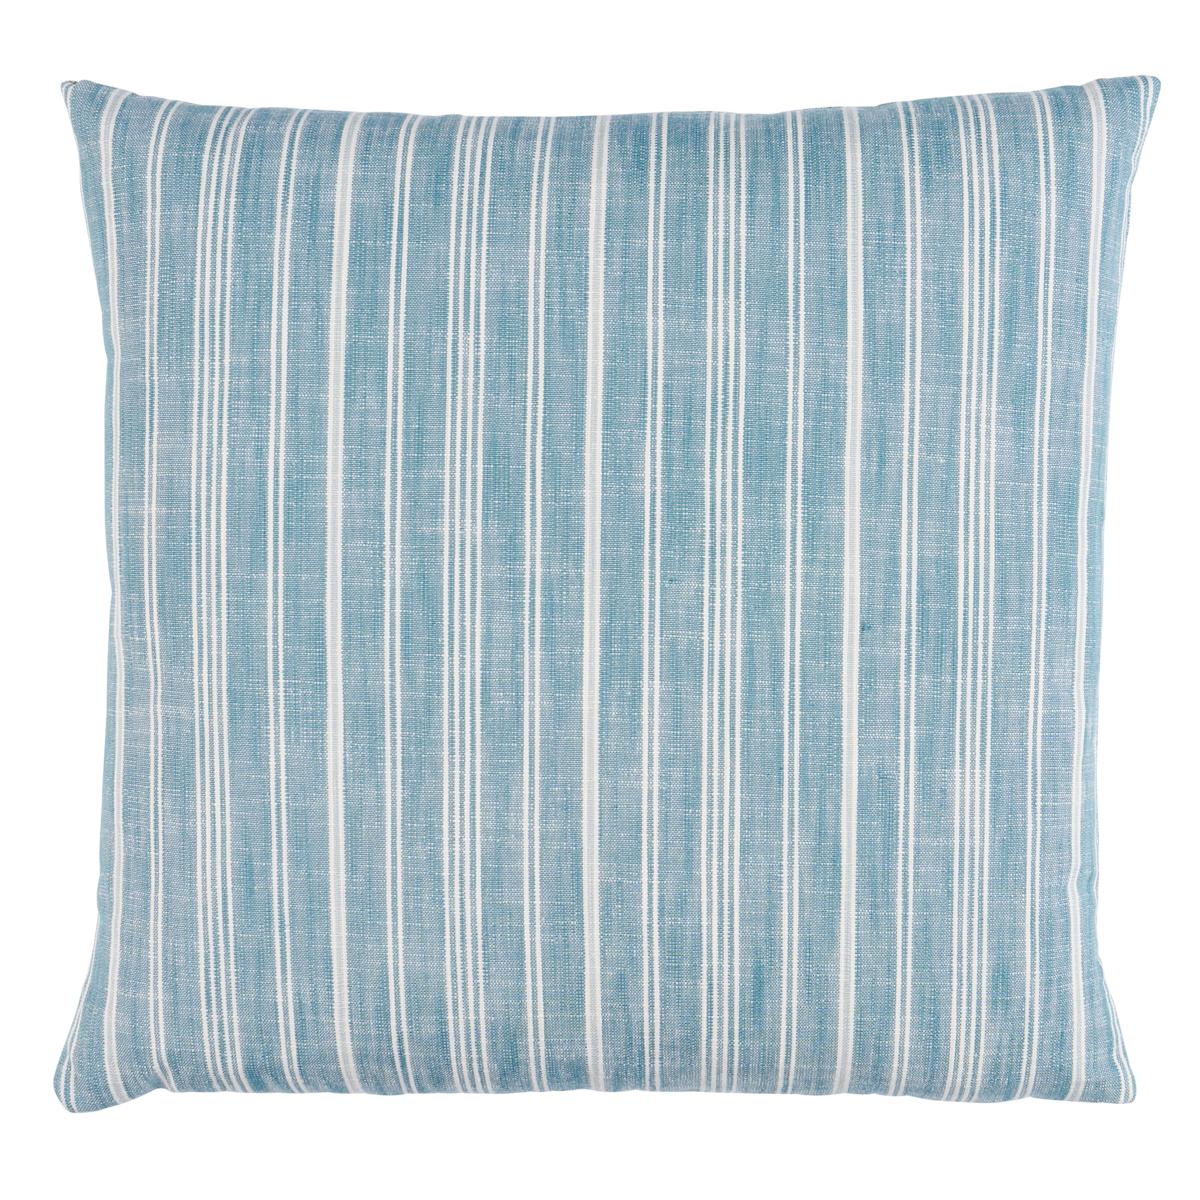 Lucy Stripe Pillow in Indigo 20 x 10" For Sale